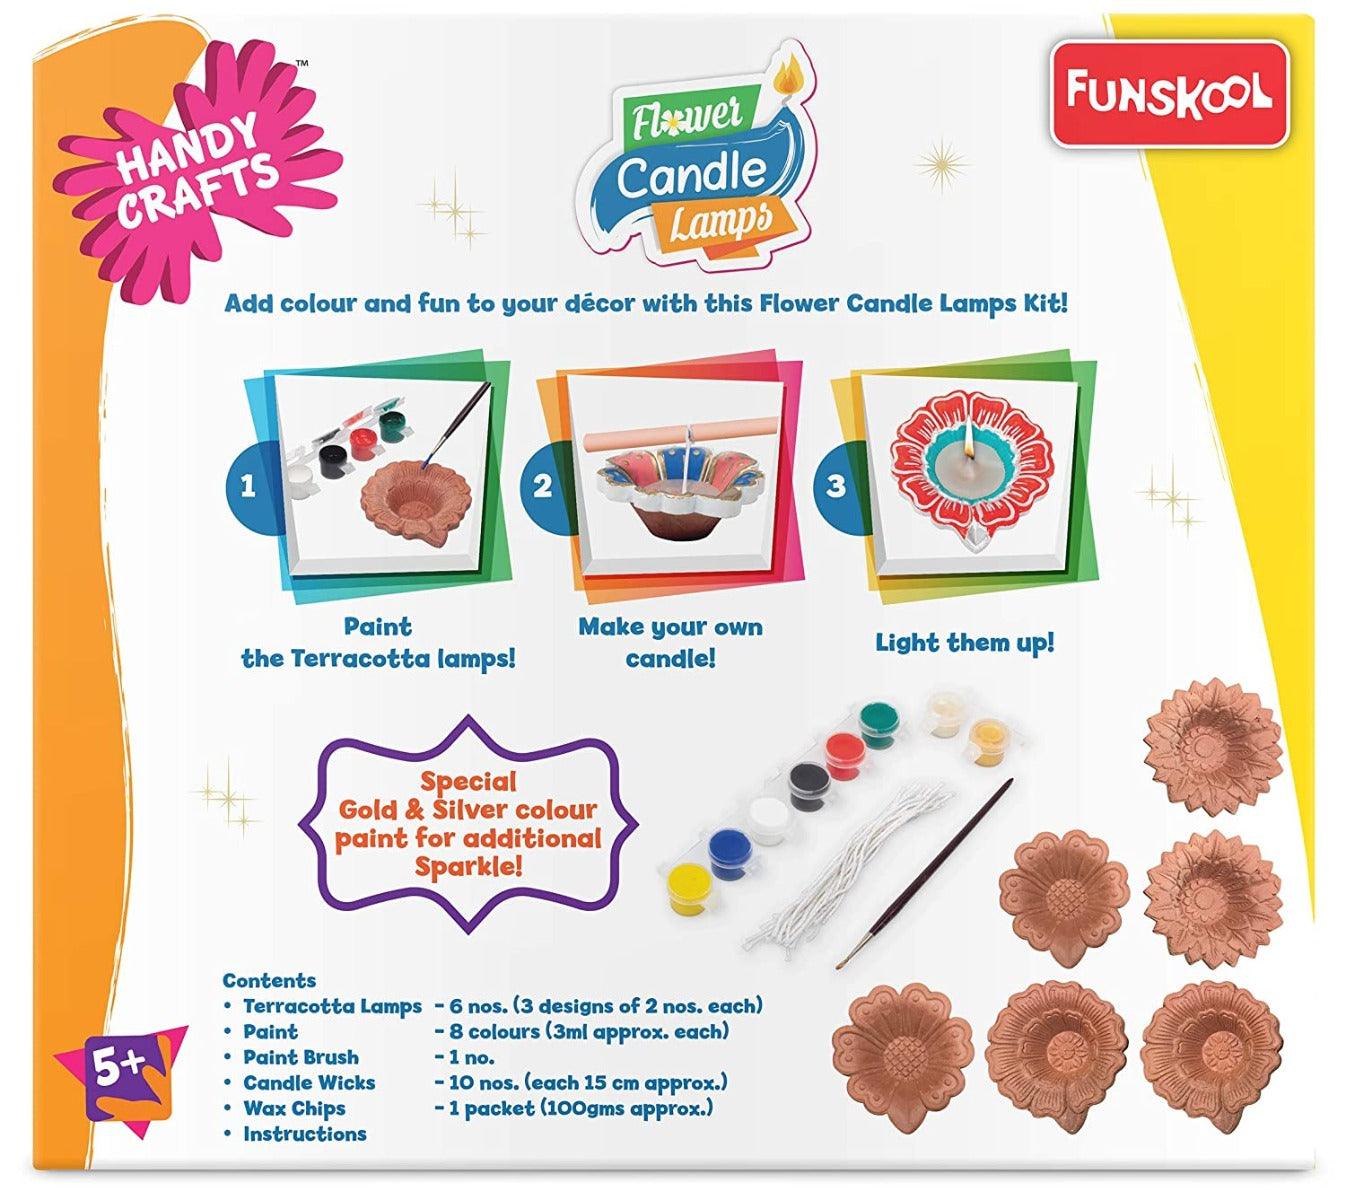 Funskool Handycrafts - Flower Candle Lamps - Art & Craft Decorating Kit for Ages 5+